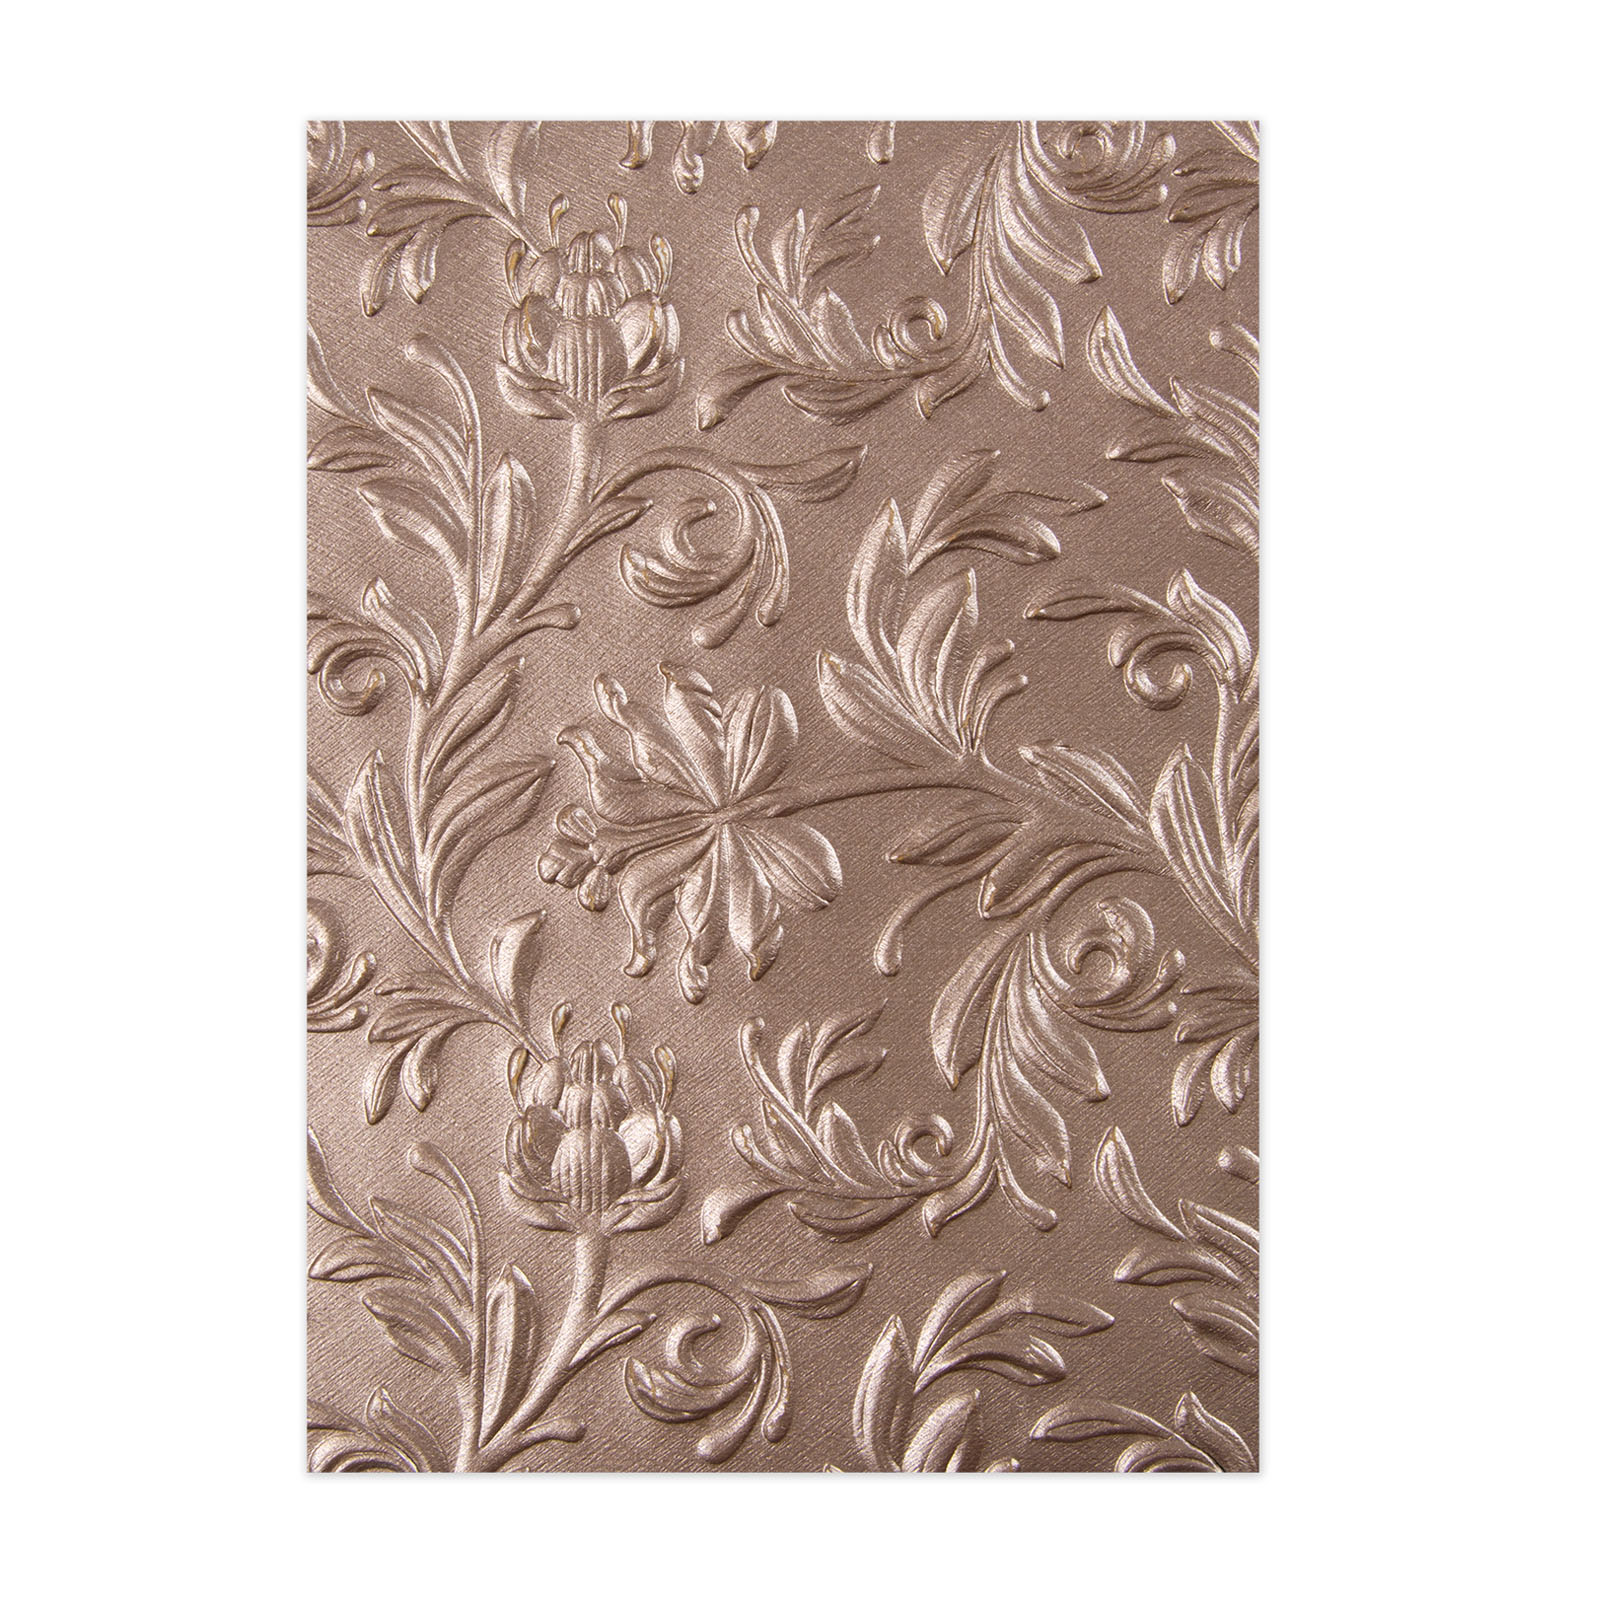 Sizzix • 3D Textured Impressions Embossing sjabloon Botanical